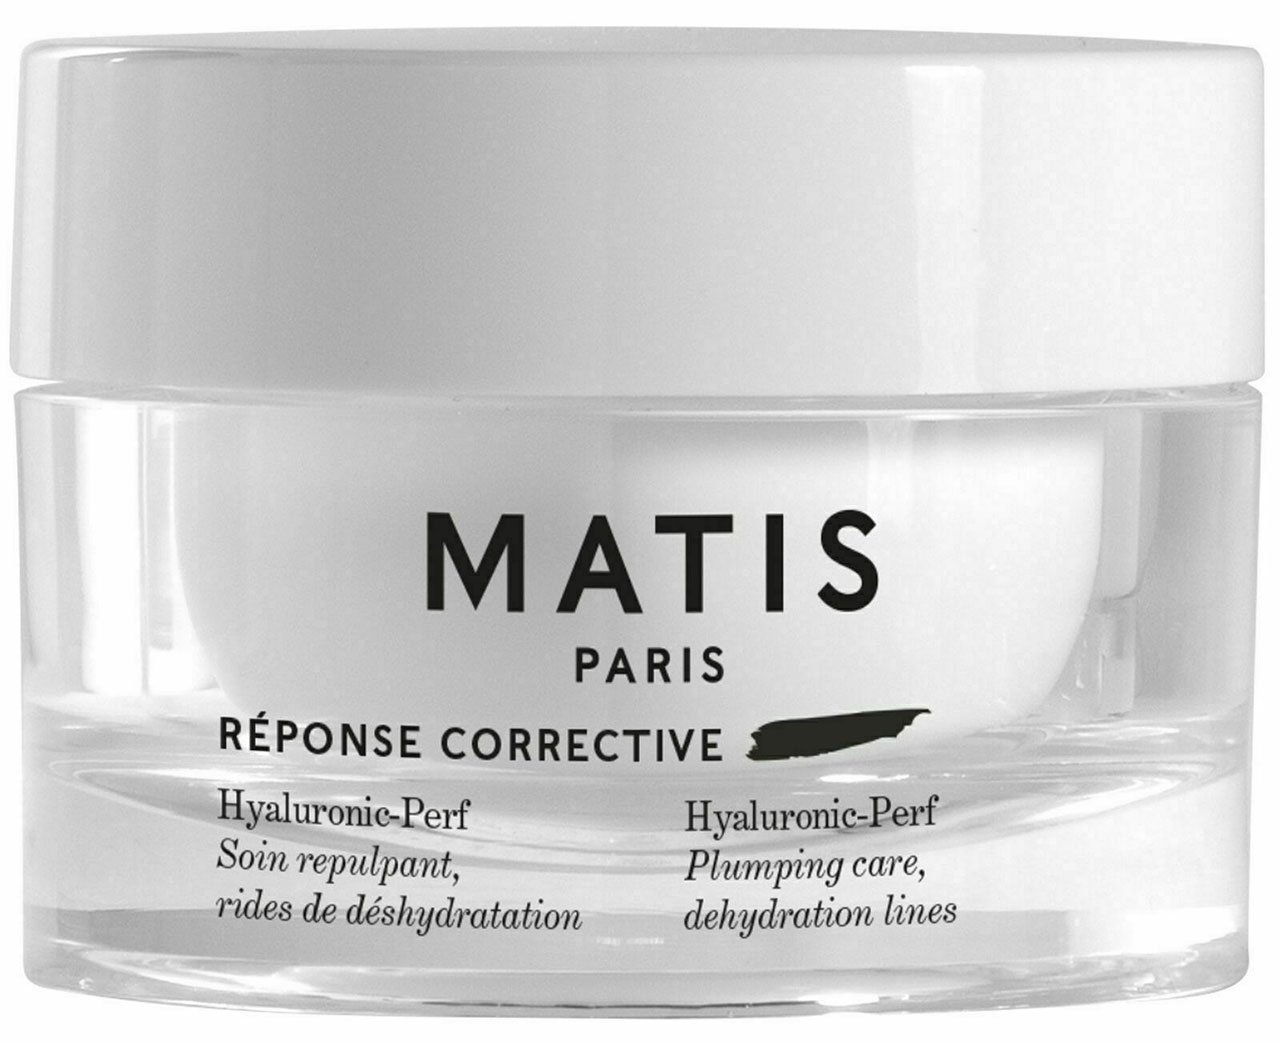 Matis Paris Reponse Corrective Hyaluronic-Perf Cream - 1.69 oz (A1010041) Questions & Answers